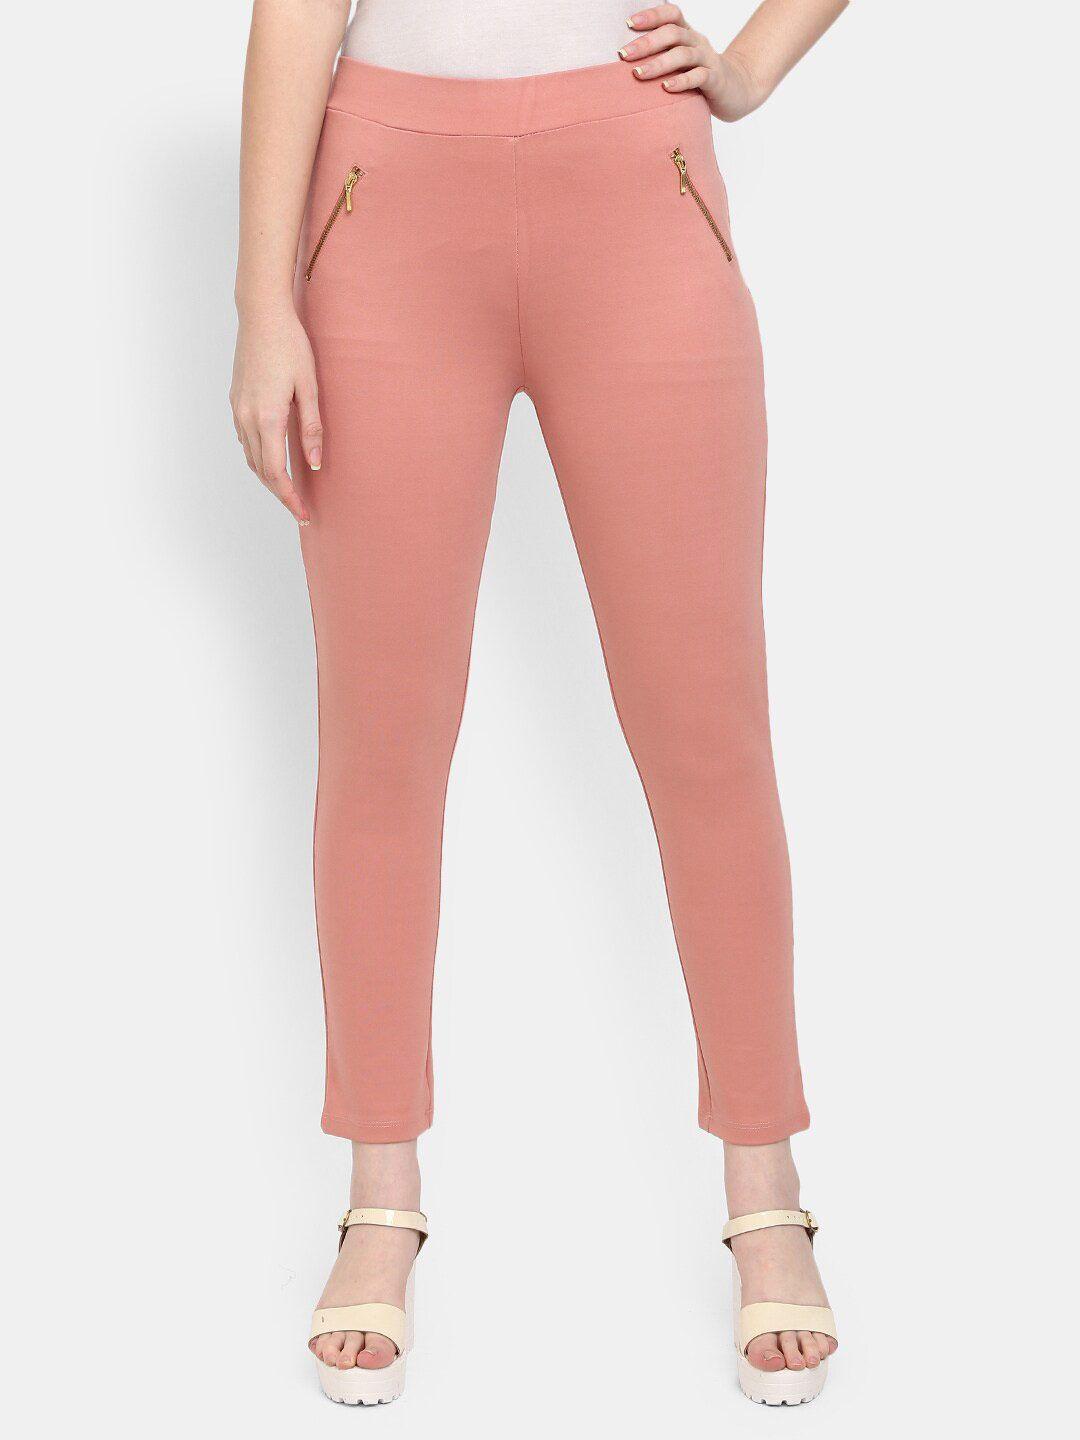 v-mart woman peach solid  jegging